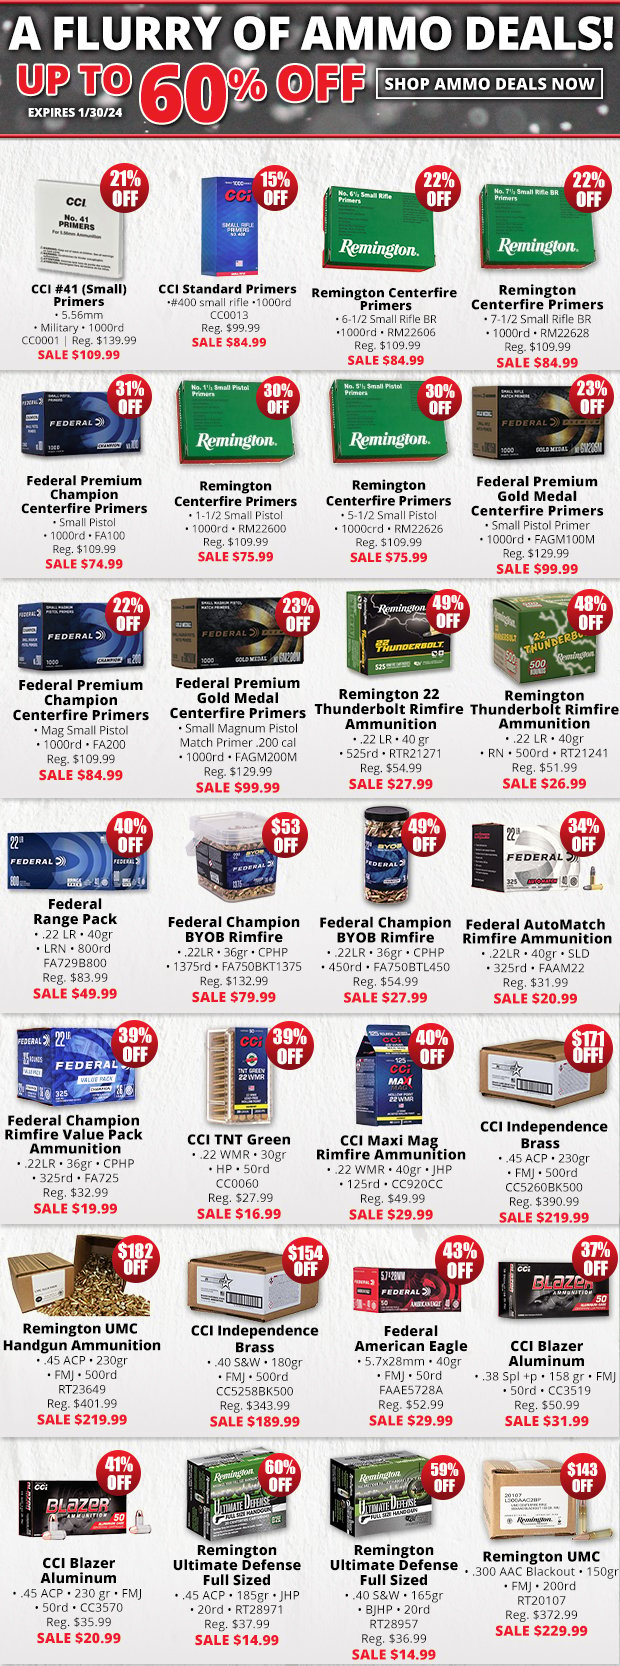 Up to 60% off in Ammo Savings!